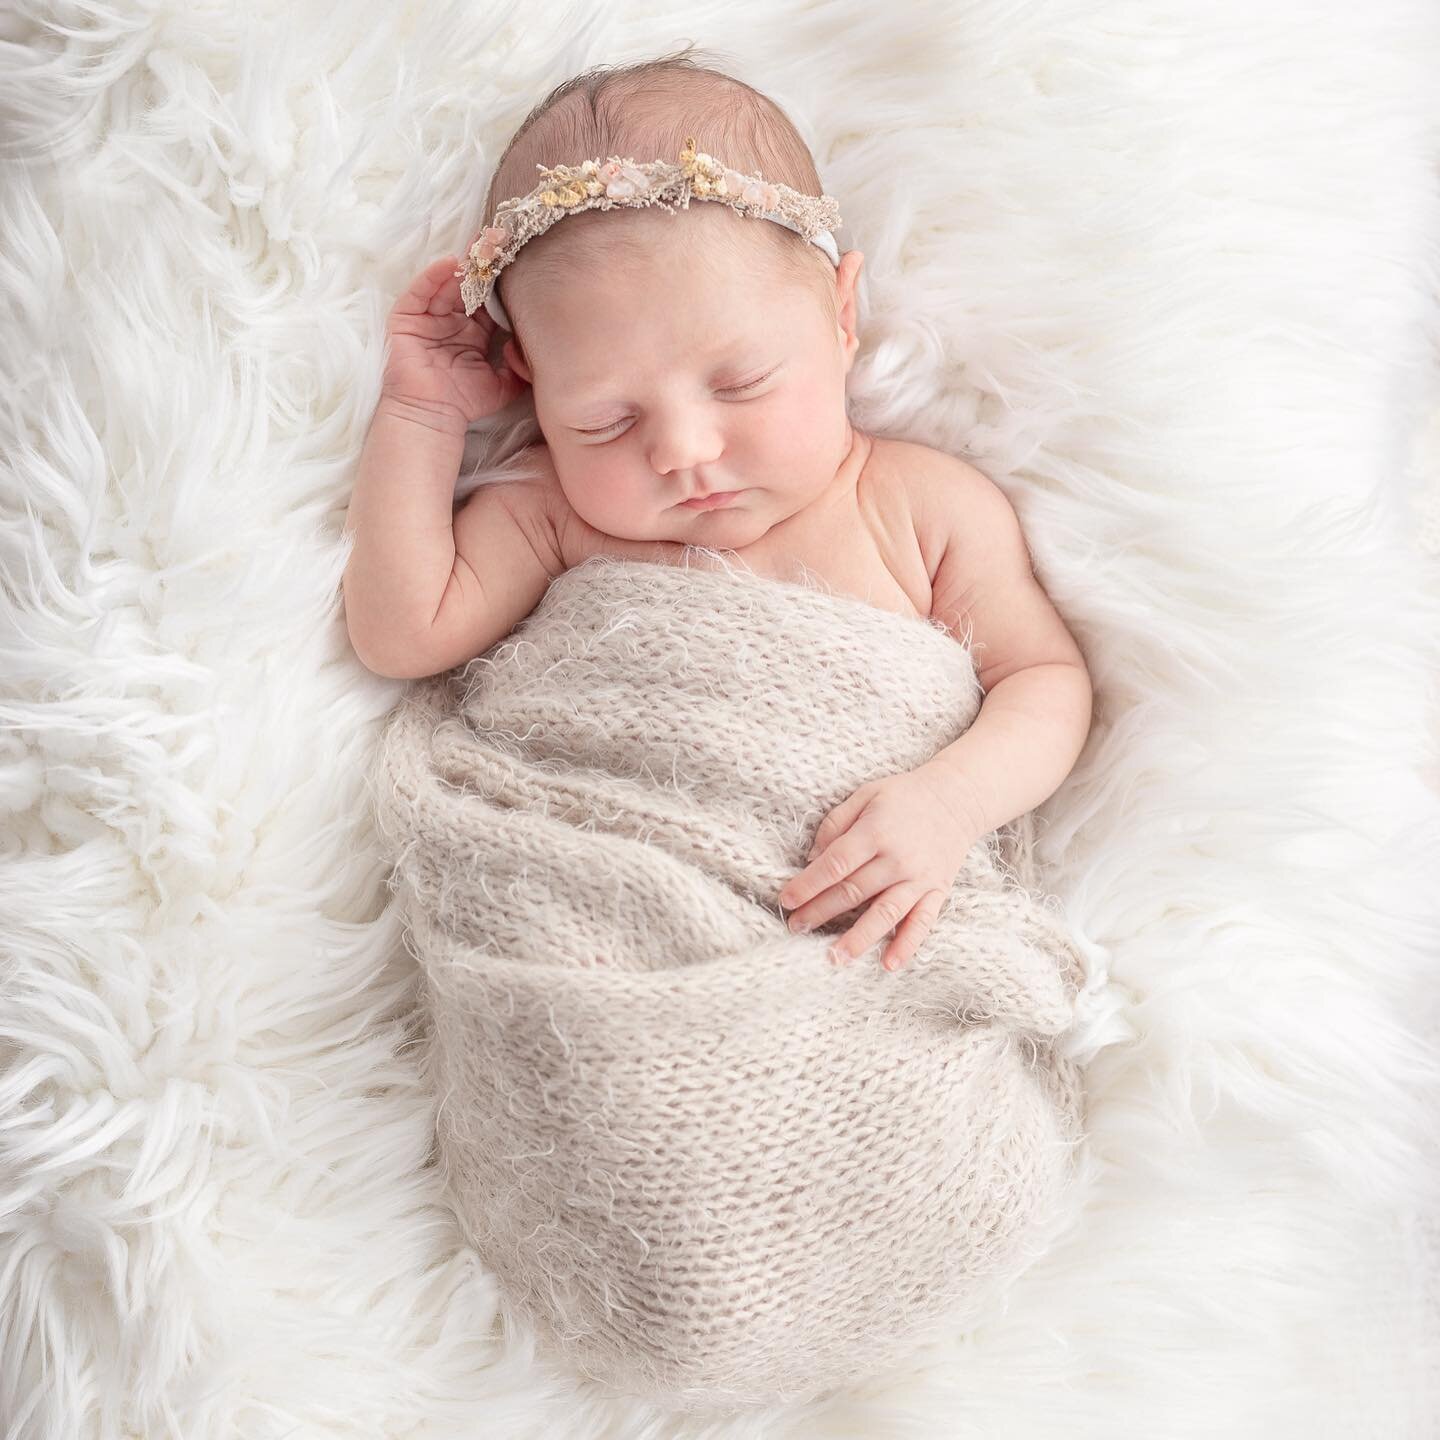 What&rsquo;s the best age to photograph your Newborn? Swipe to learn more &hearts;️
.
.
.

#londonbaby #londonbabyphotographer #londonphotographer #londonnewbornphotographer #richmondphotographer #richmondmums #richmondmumsandbubs #richmondfamilyphot